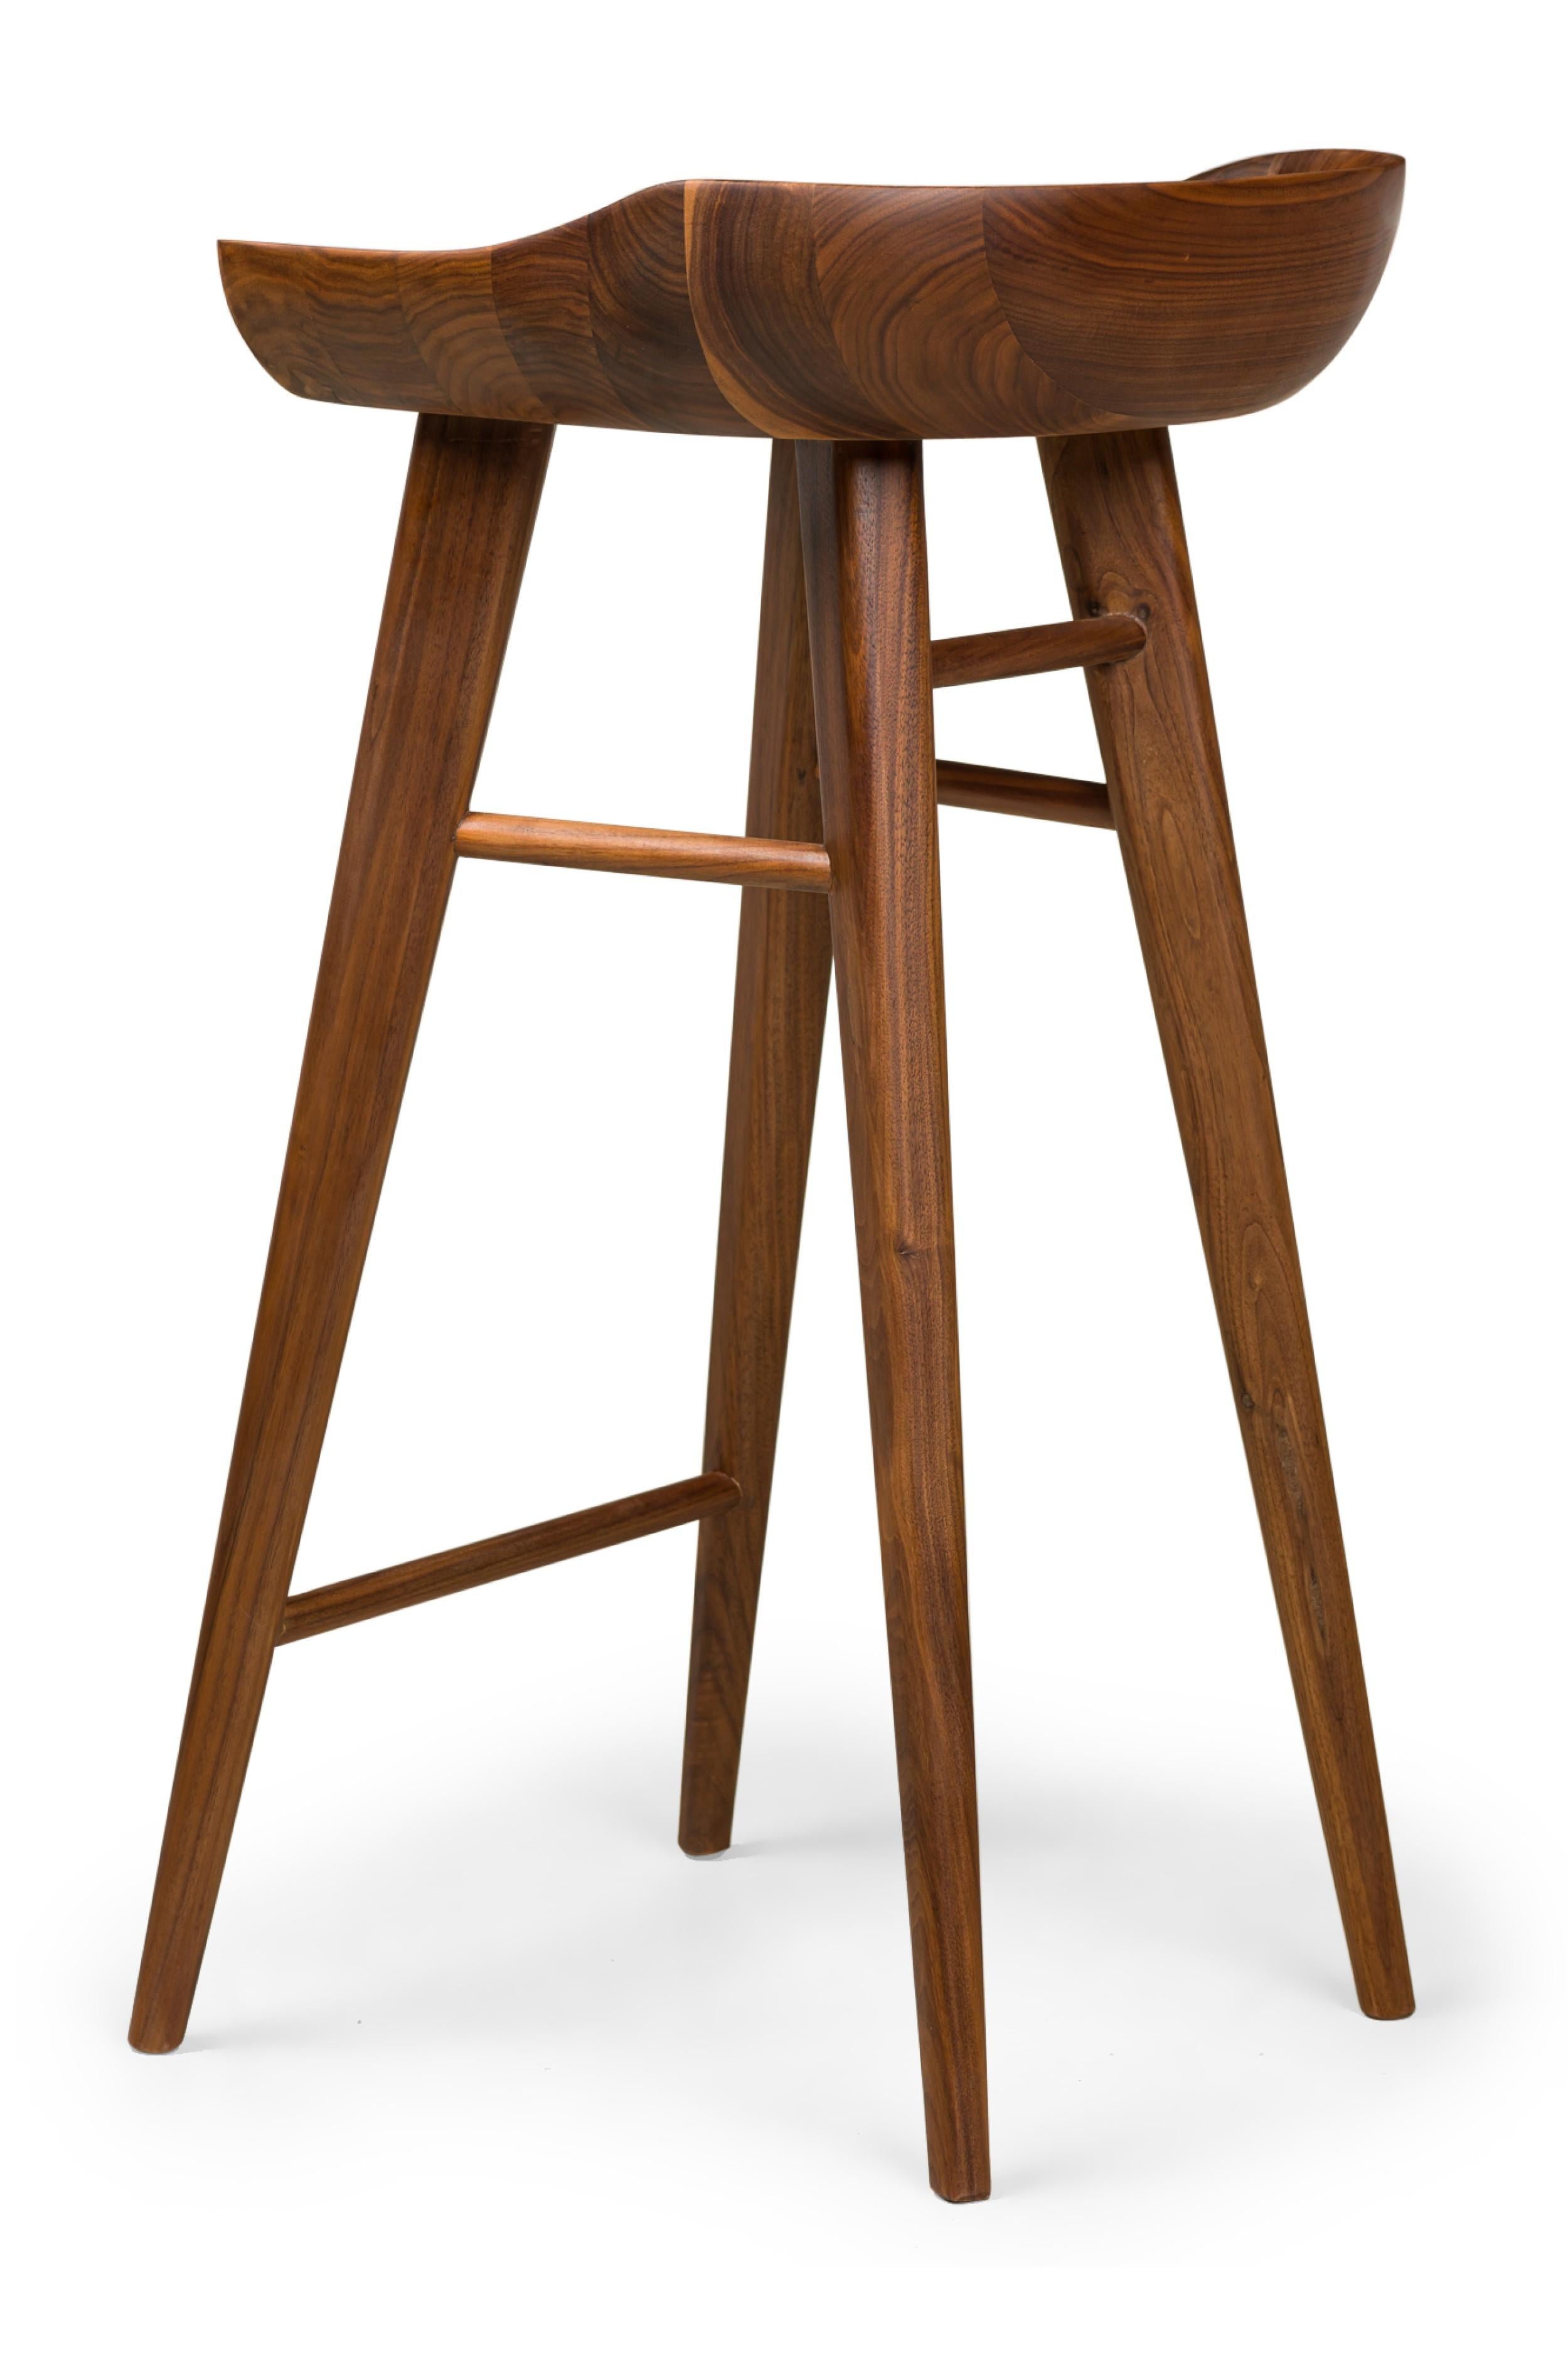 Fernando Biomorphic Barstools by Newel Modern In Good Condition For Sale In New York, NY